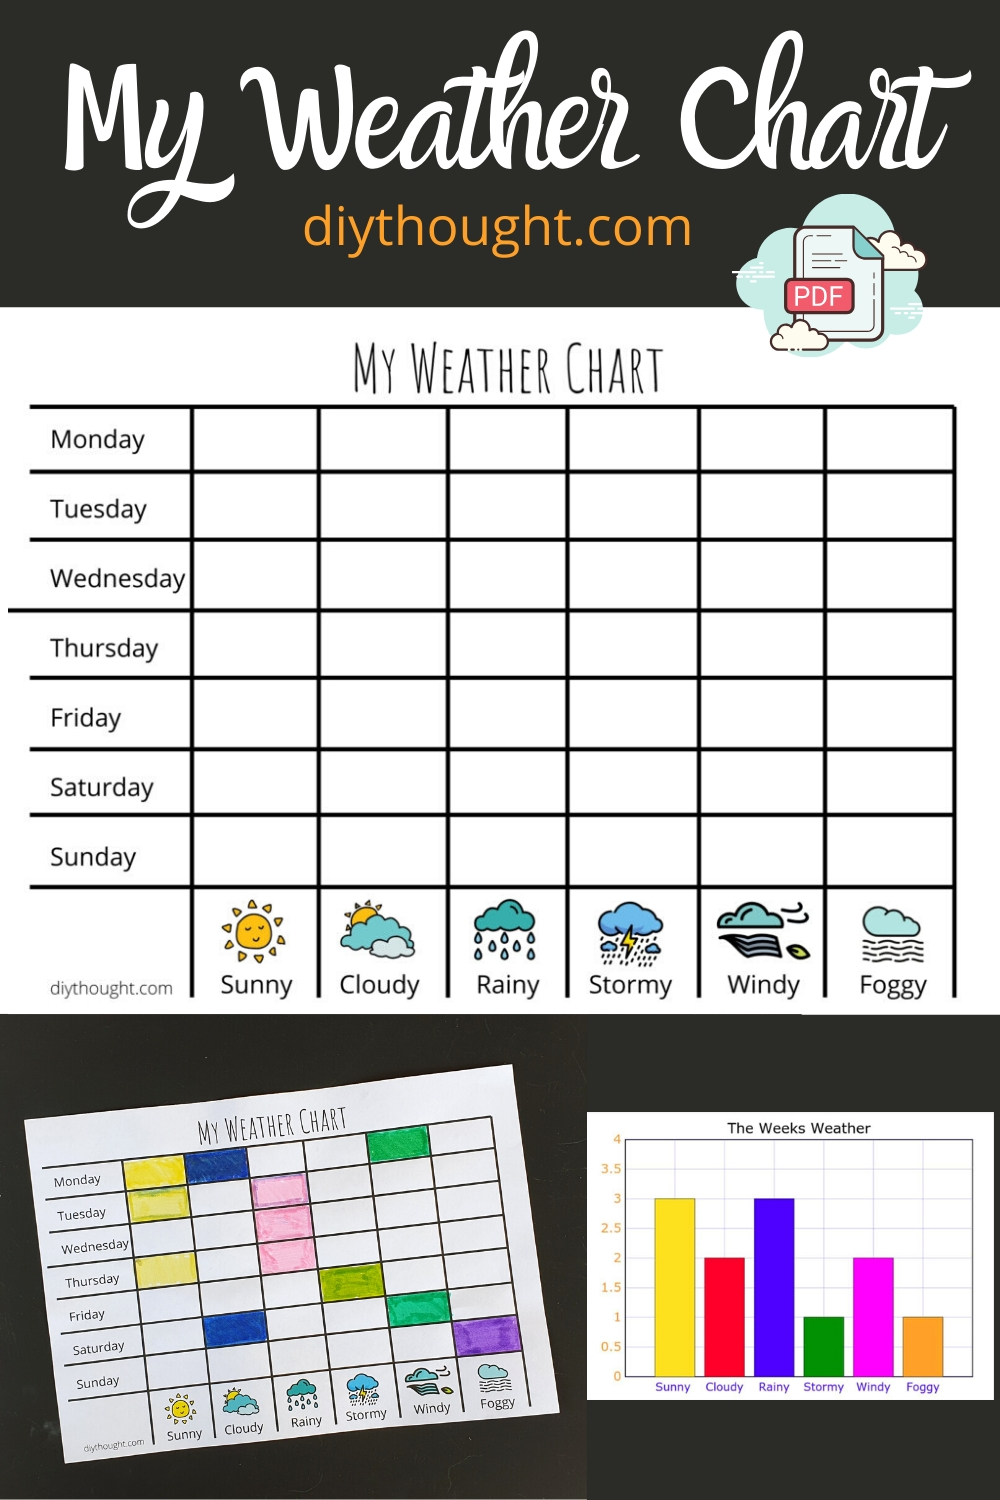 my-weather-chart-diy-thought